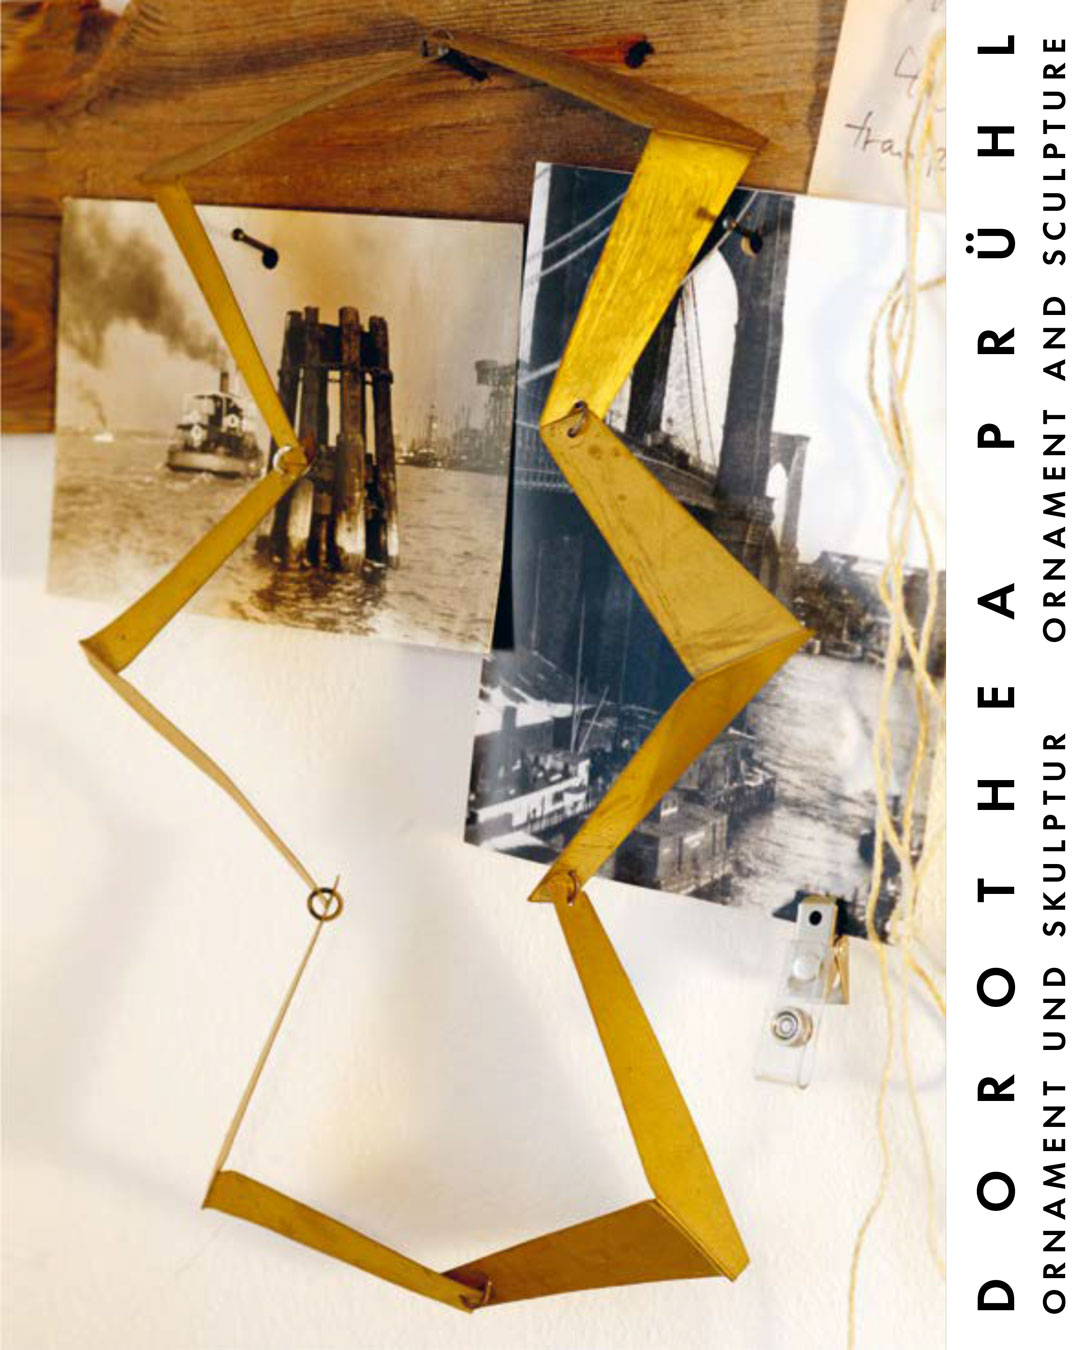 Ornament and Sculpture - book 2020 - see: >PUBLICATIONS>BOOKS